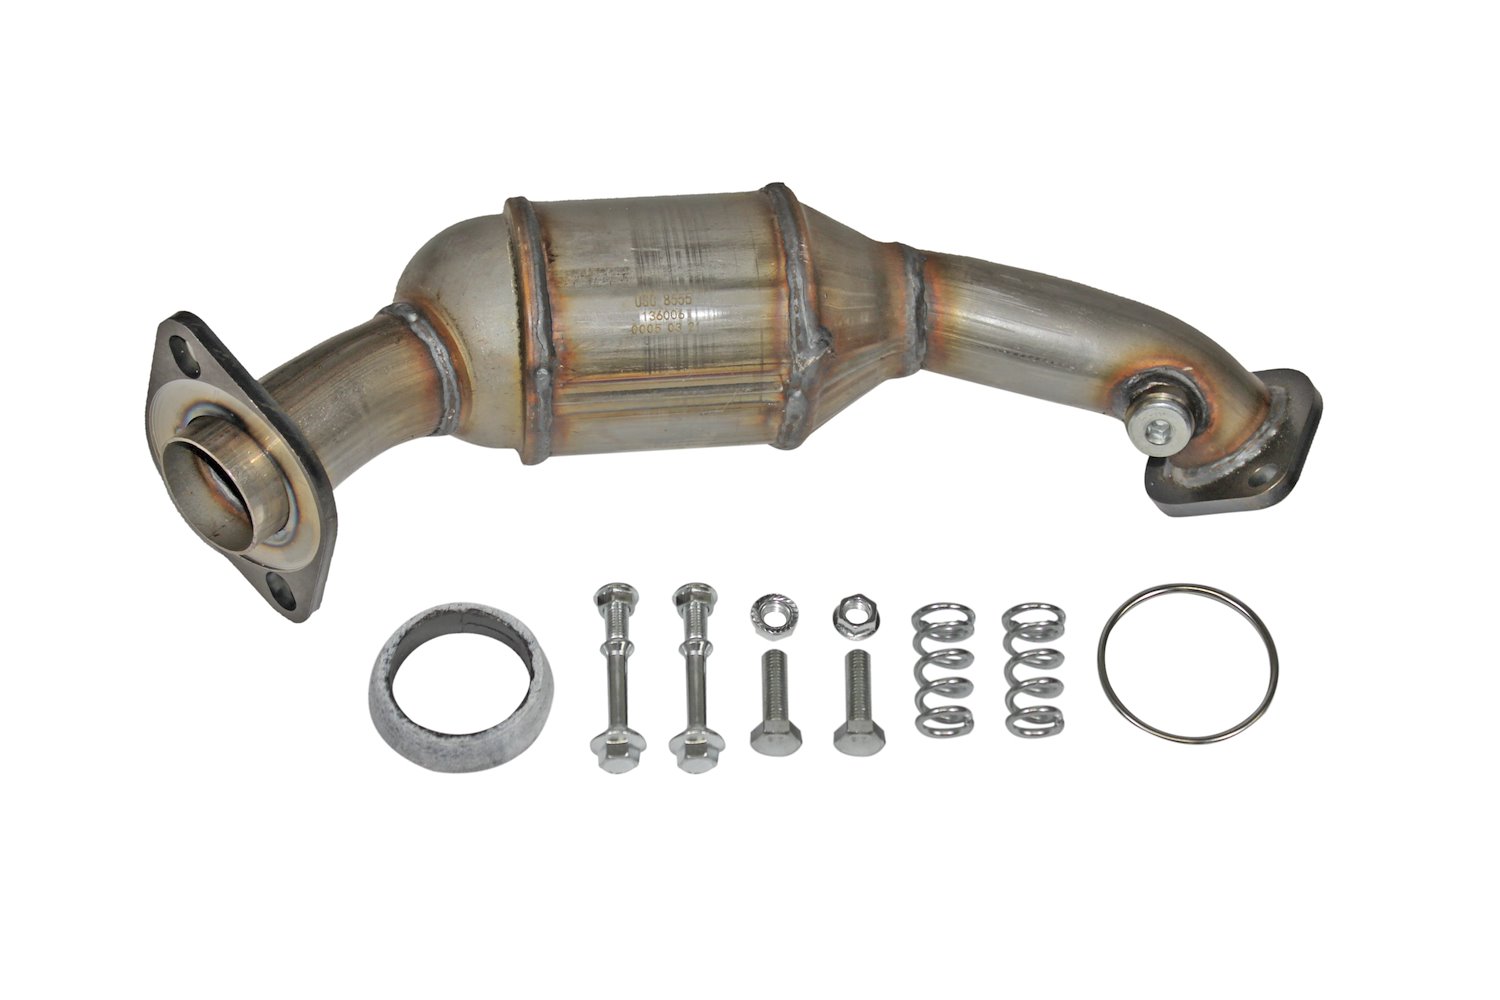 Catalytic Converter Fits 2004-2006 Cadillac CTS w/3.6L V6 Eng., 2005-2007 Cadillac CTS w/2.8L V6 Eng. [Front Left]